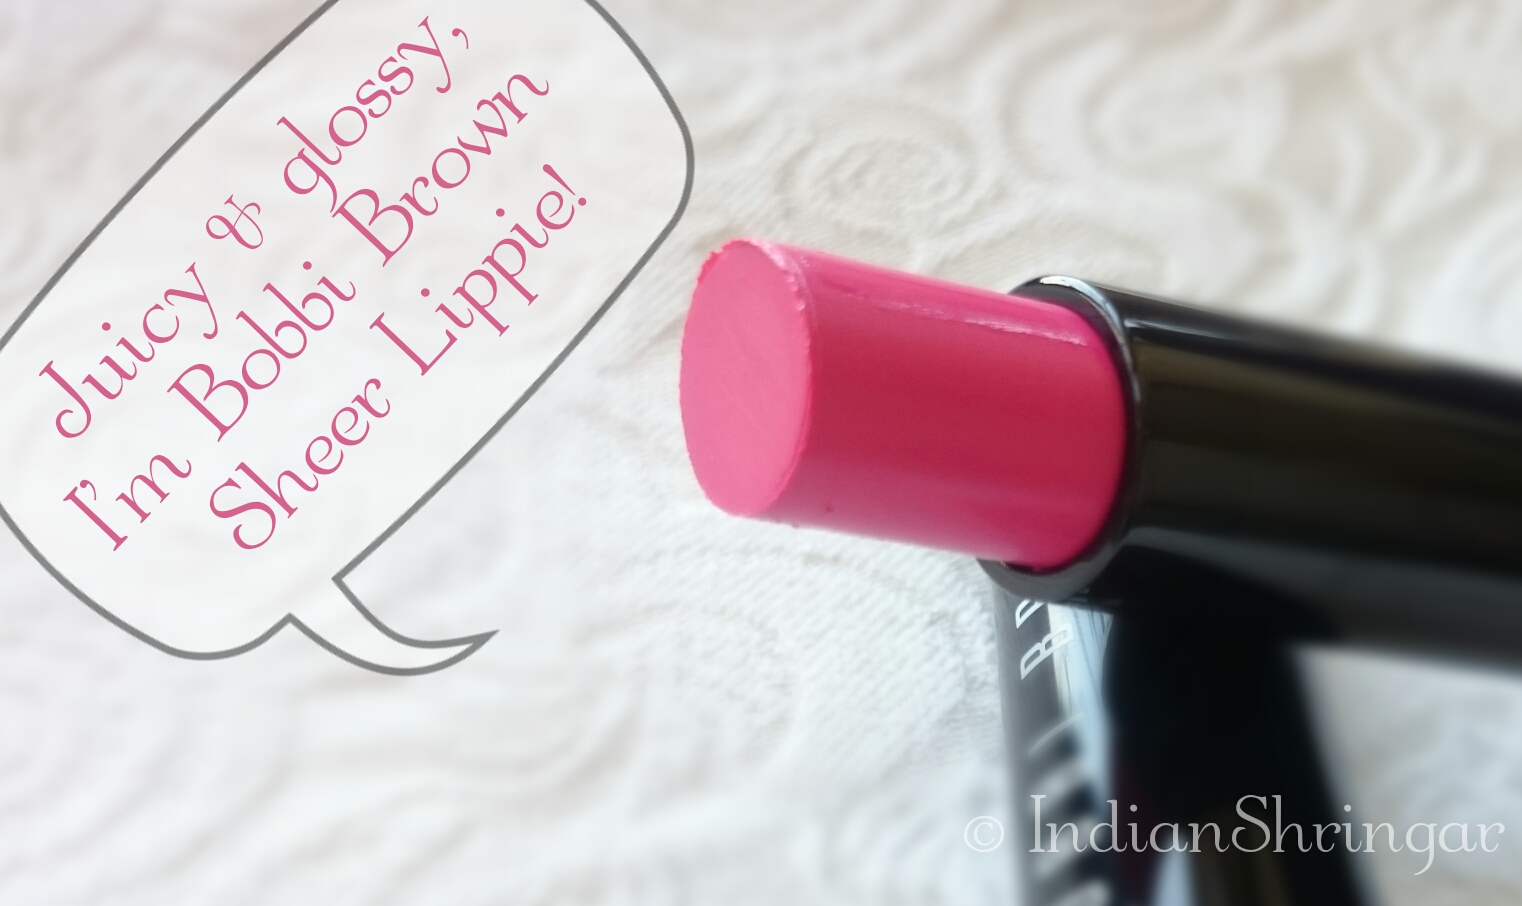 Bobbi Brown Sheer Lip Color Hot Raspberry review, swatch, price in India